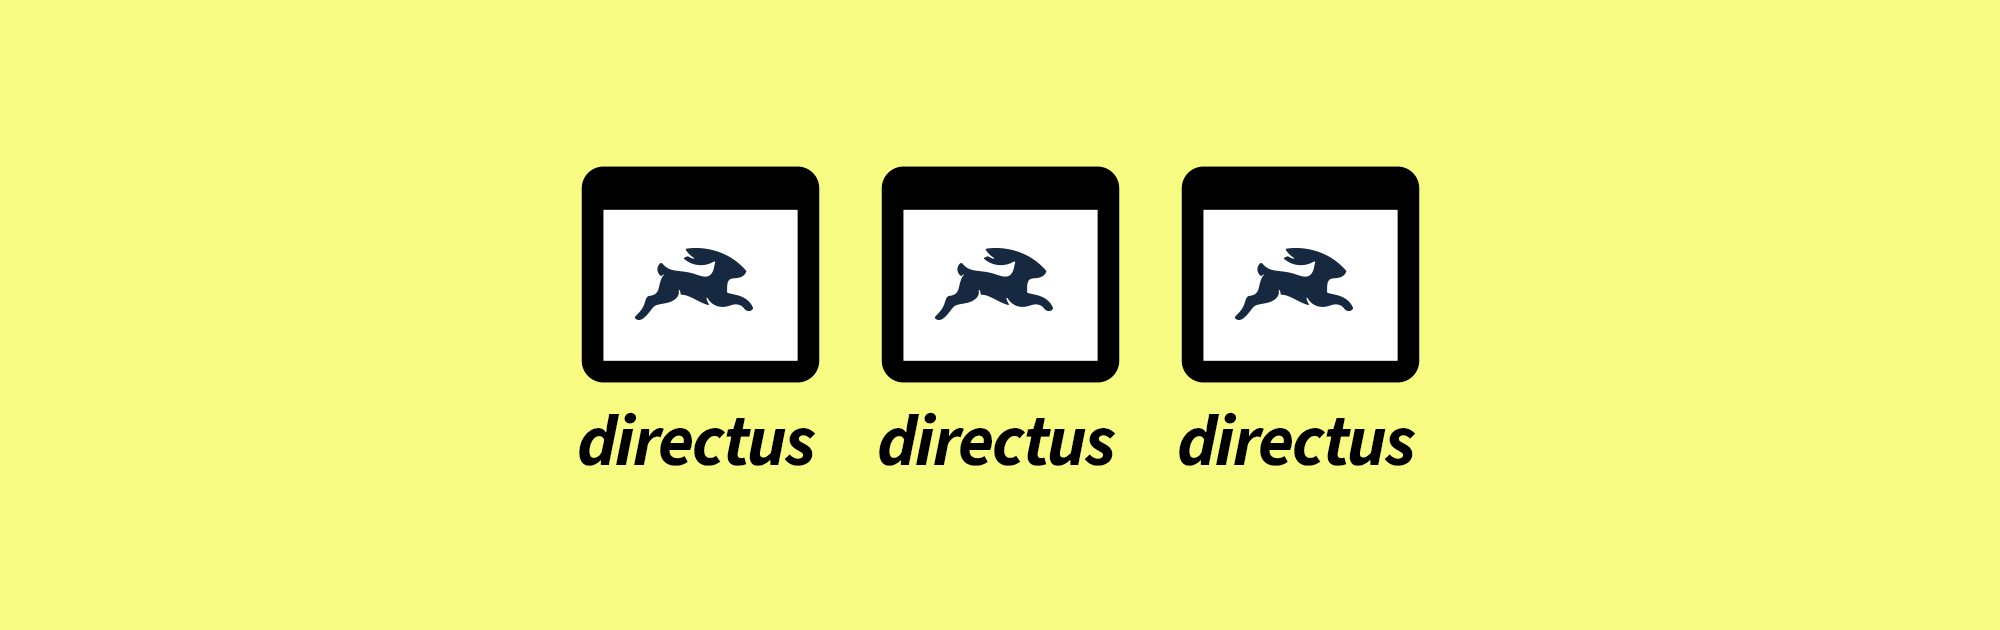 How to Manage Multiple Projects in Directus